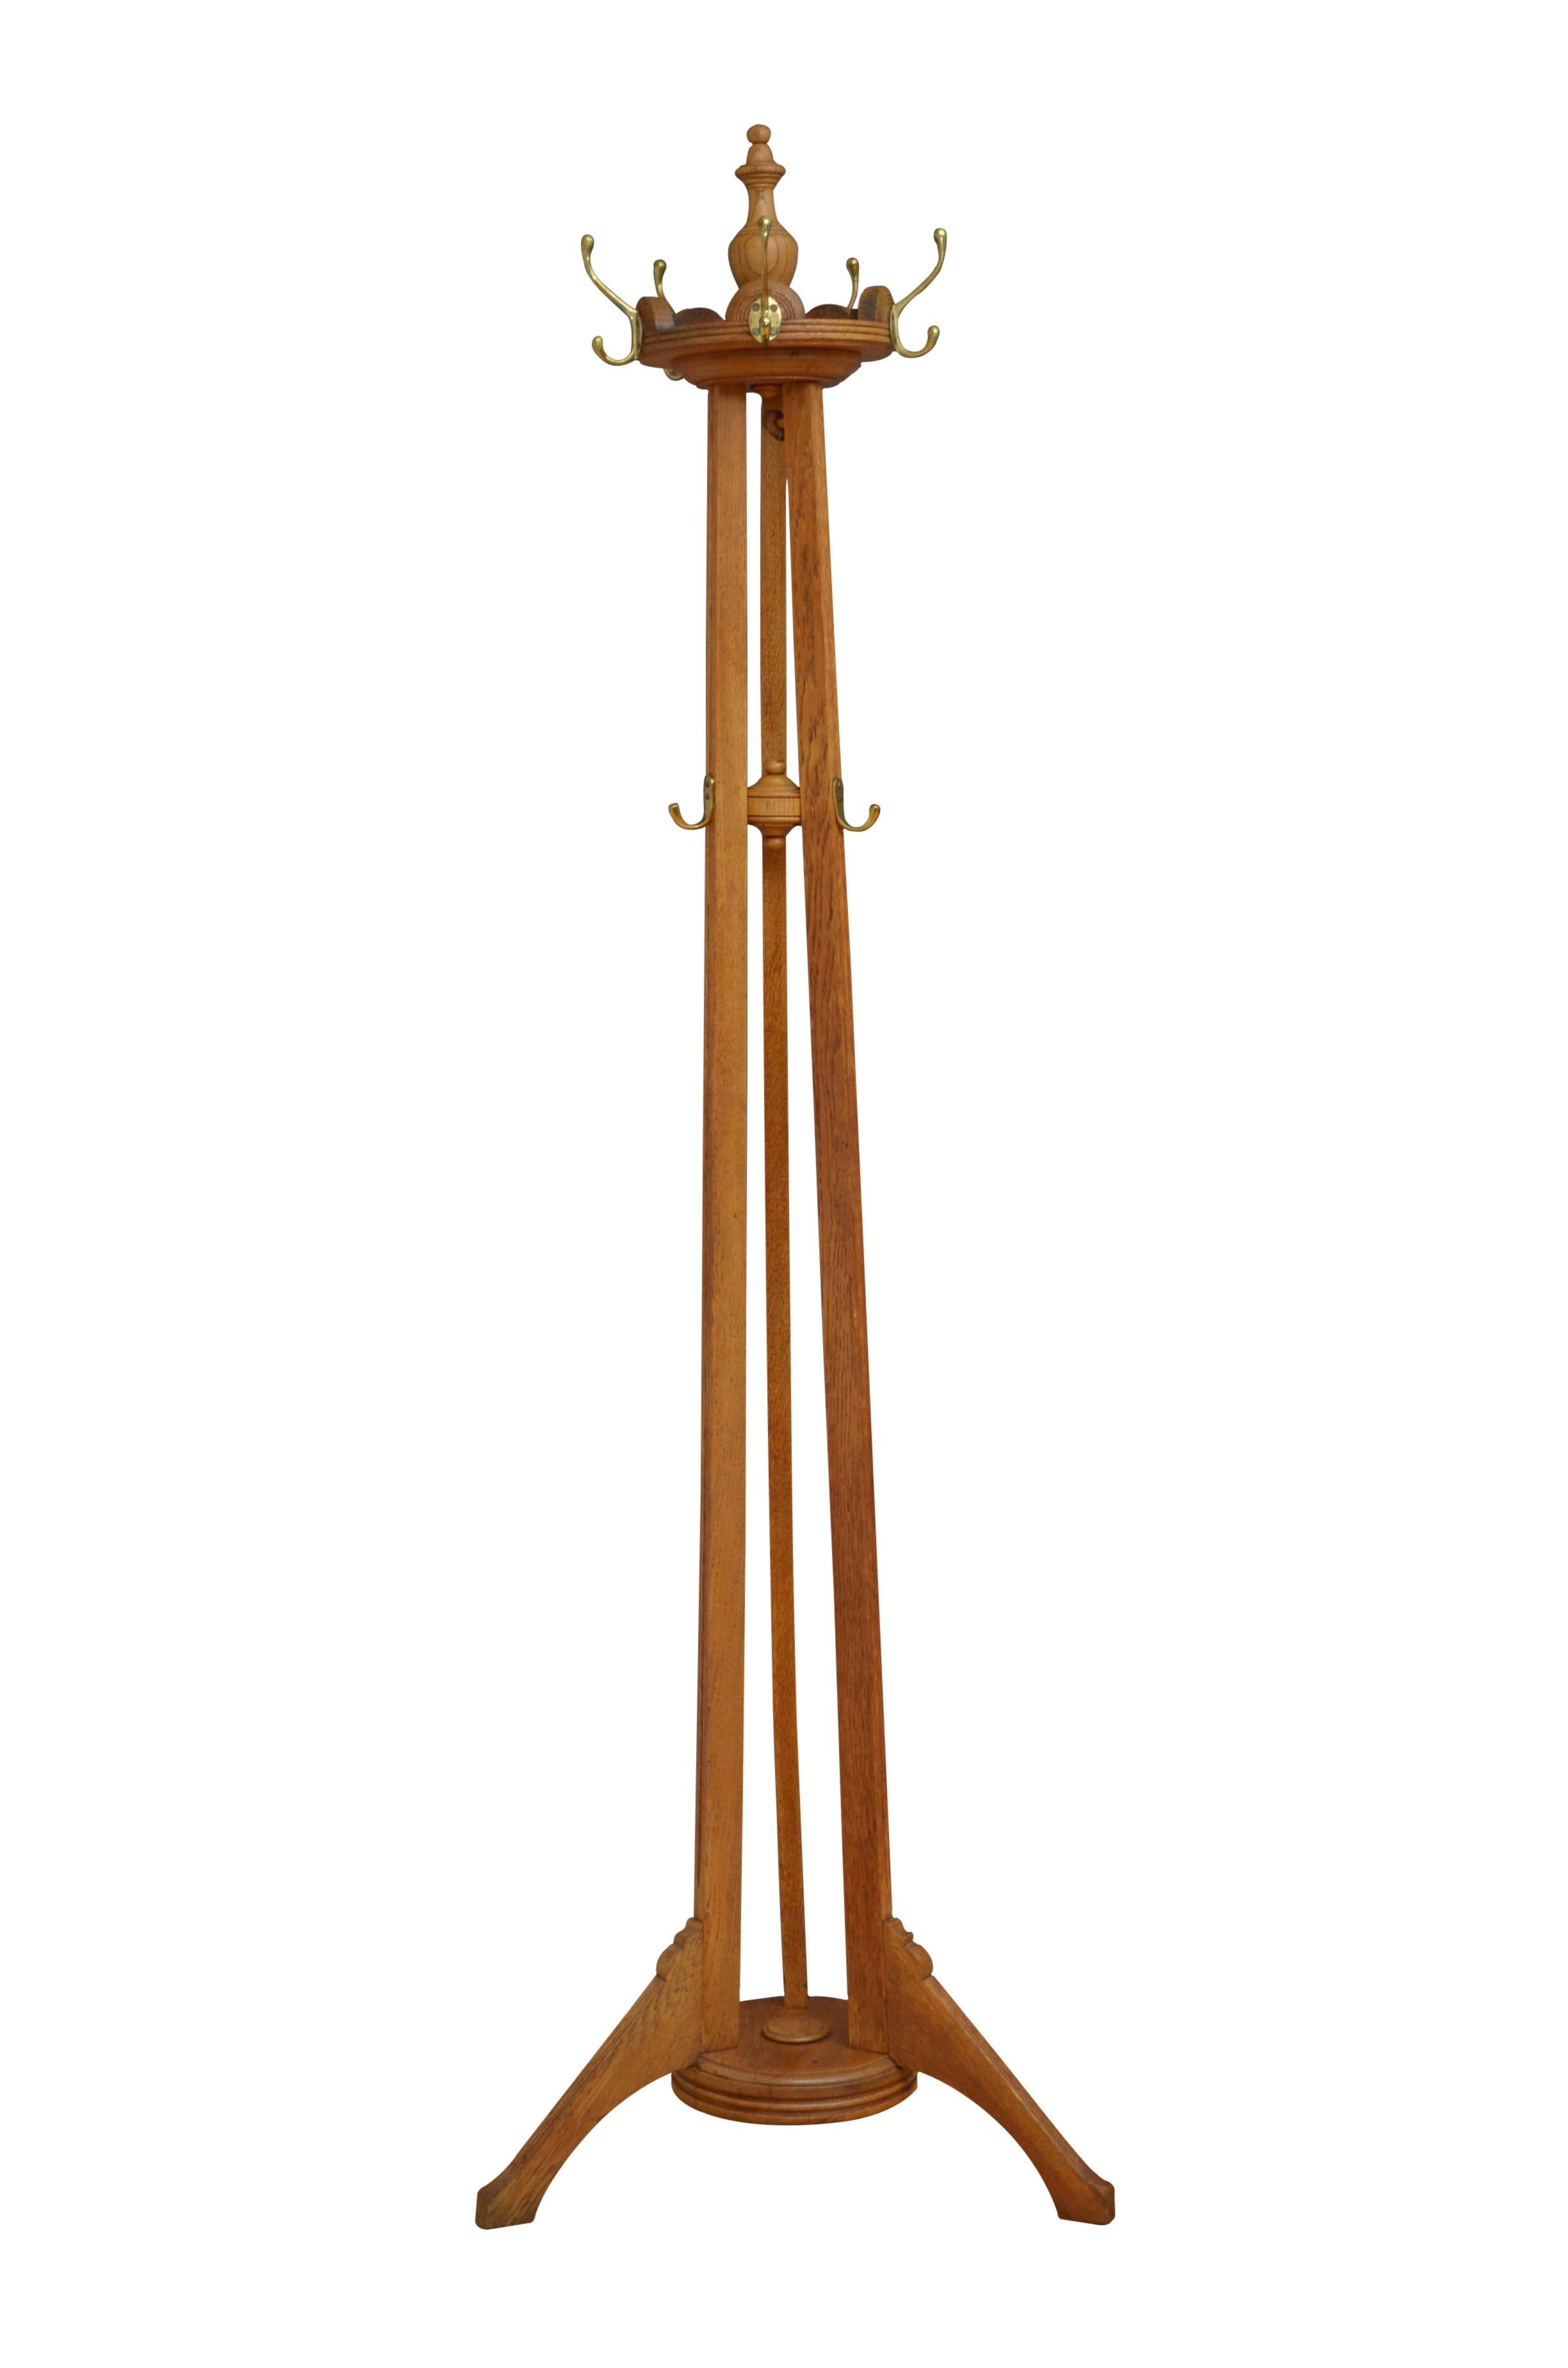 K0590 Arts and Crafts oak hat stand, having six brass hooks on revolving platform with finial to the top on 3 solid oak supports with further 3 brass hooks terminating in shaped legs and united by circular base with reeded edge. This antique coat